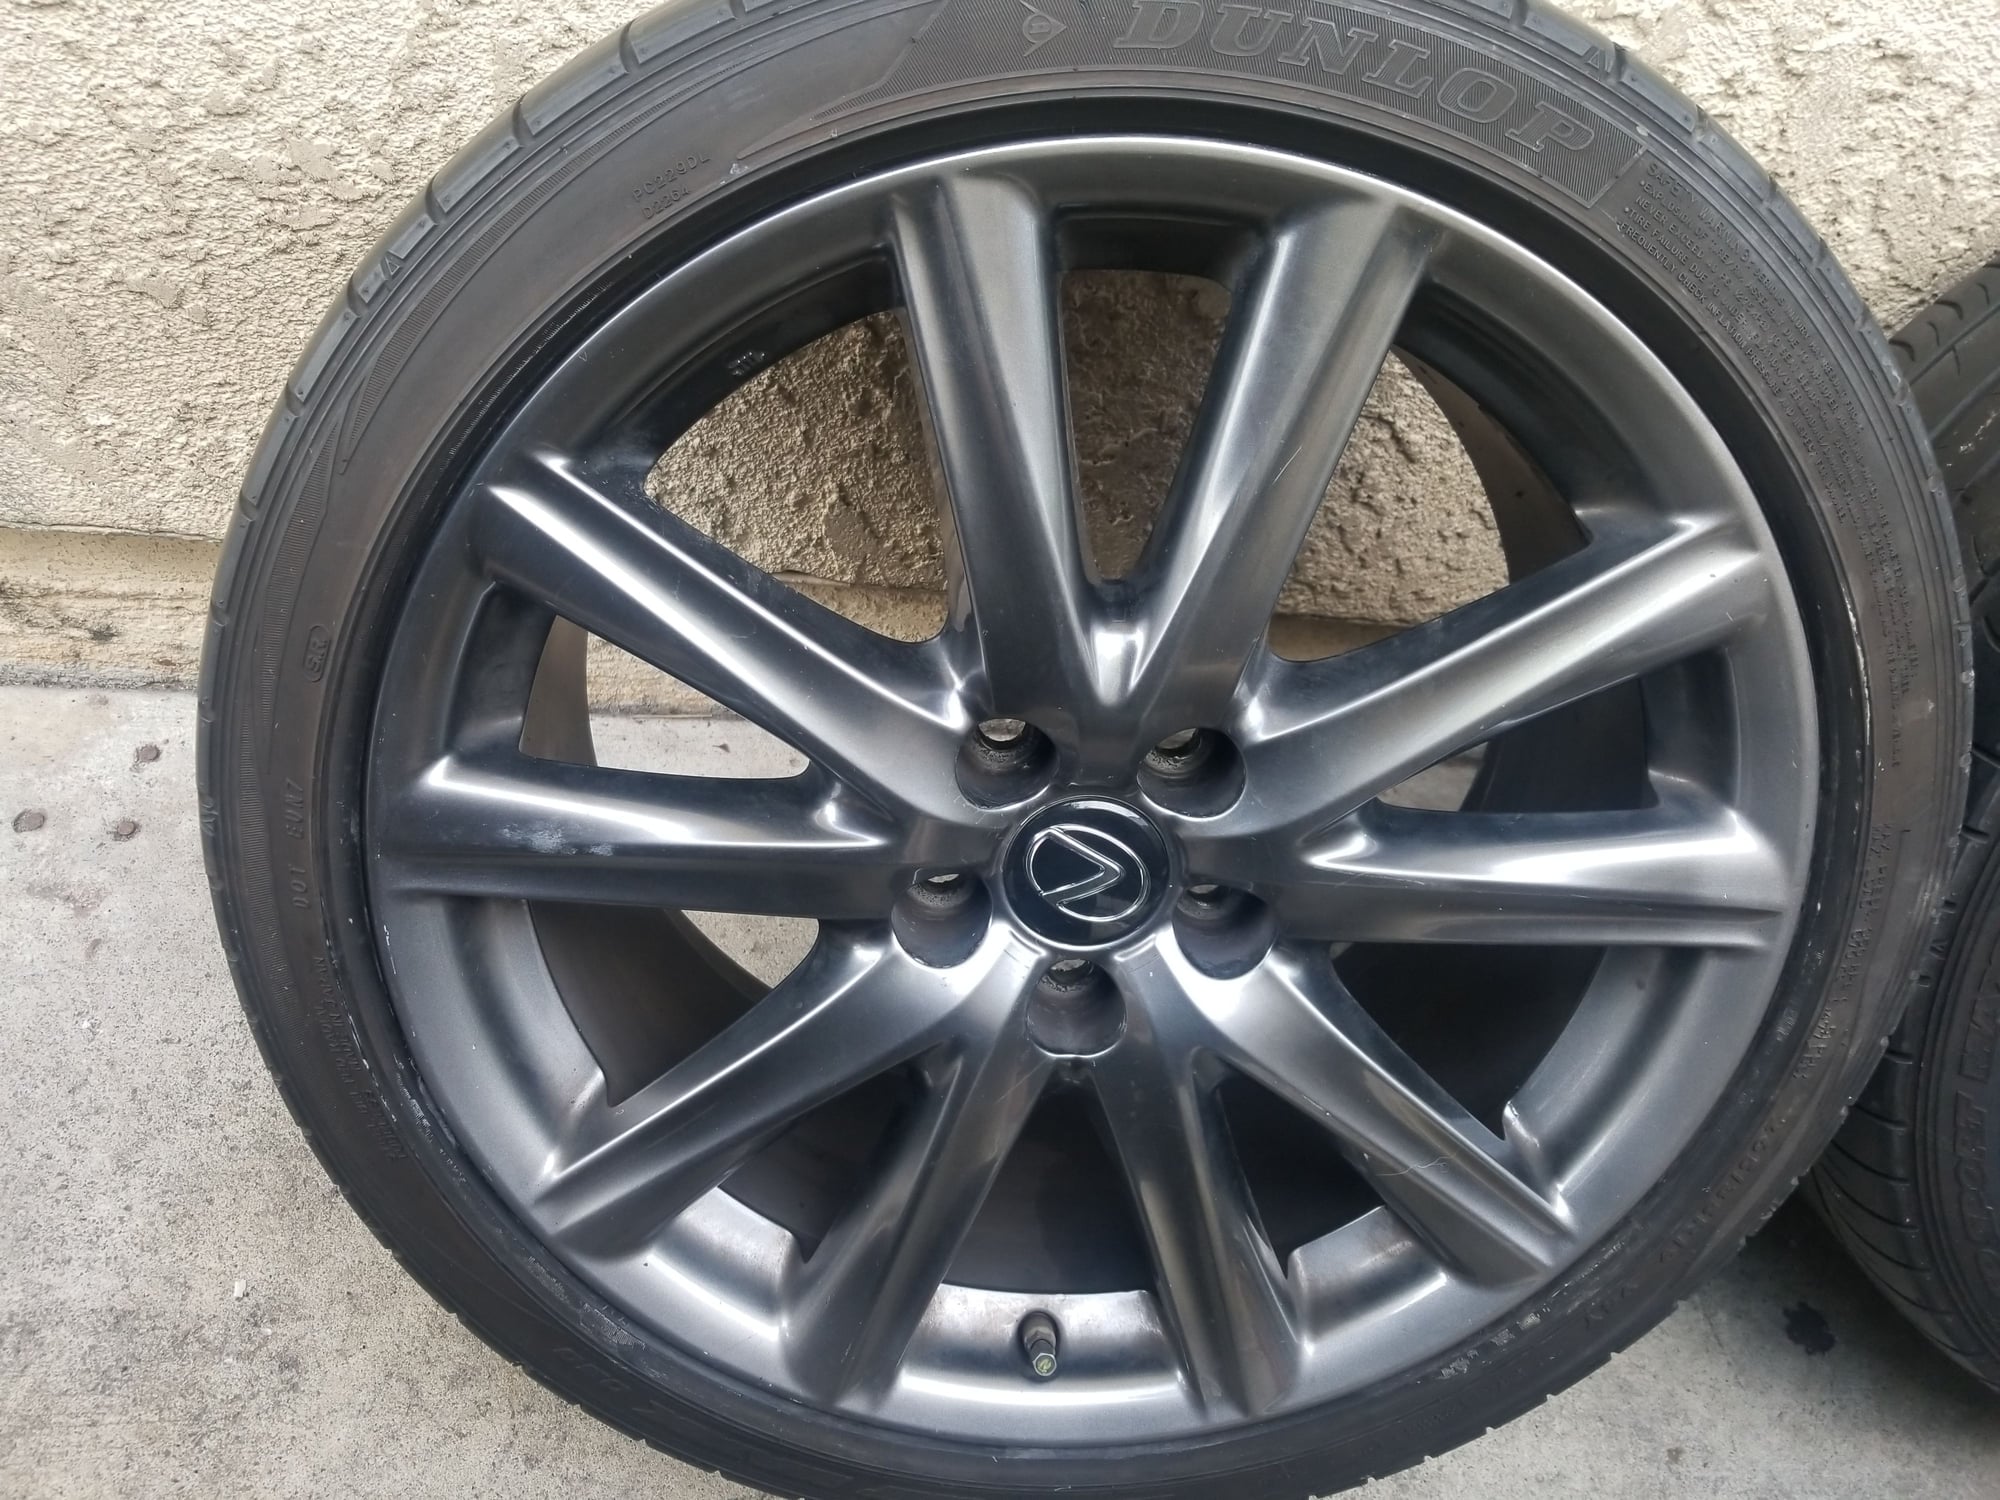 Wheels and Tires/Axles - stock 2013 gs350 f sport rims - Used - All Years Any Make All Models - 2013 to 2019 Lexus GS350 - Long Beach, CA 90805, United States